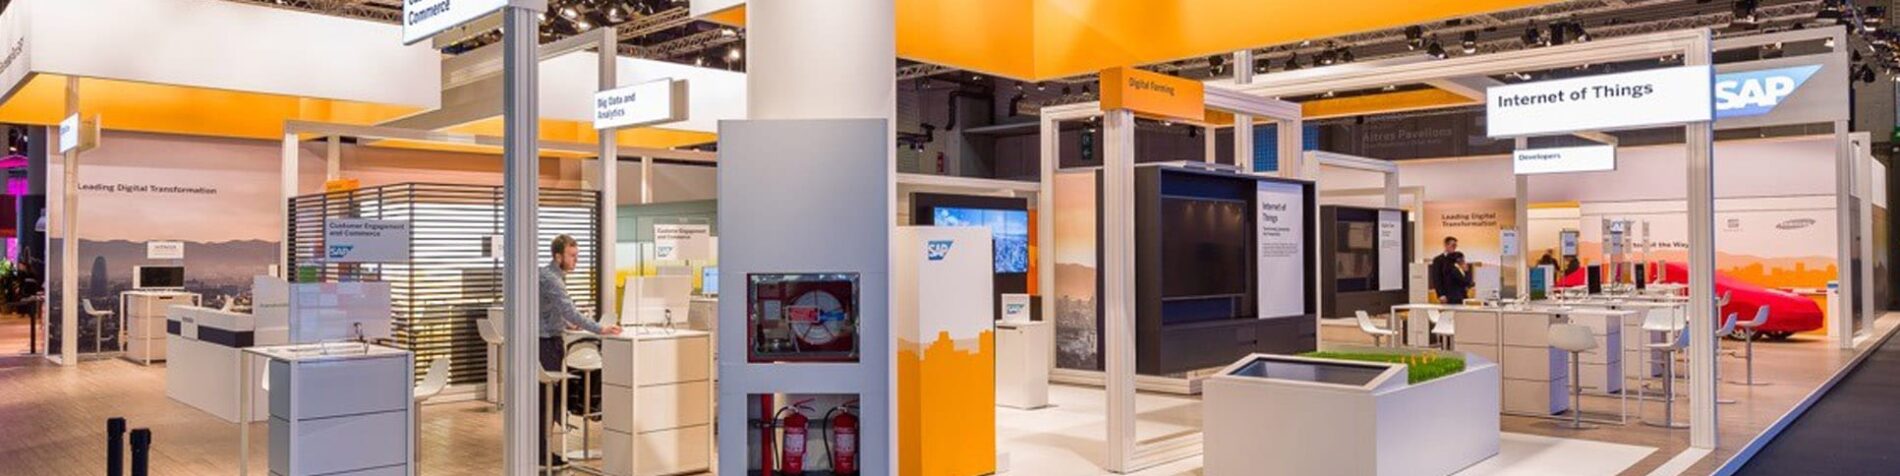 SAP at #MWC18: Six Can’t-Miss Experiences Showing How Businesses Turn Thinking Into Doing